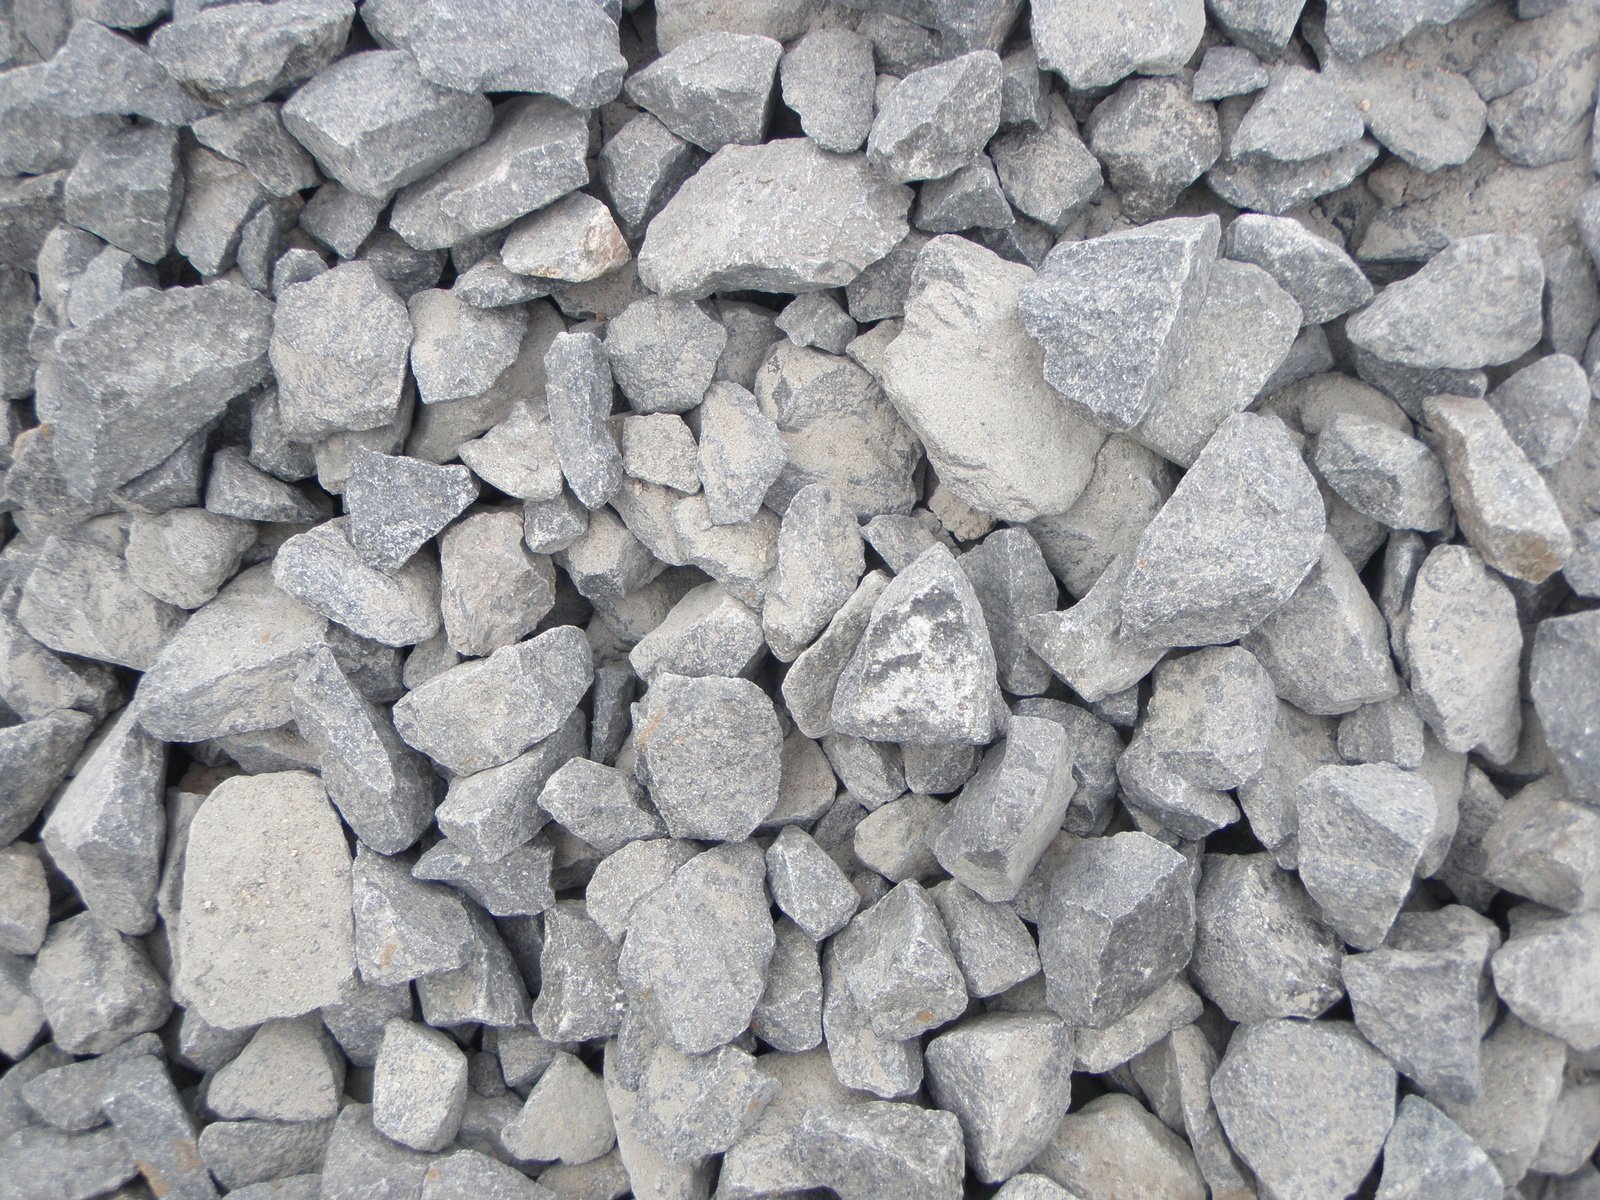 gray rocks piled on each other near each other